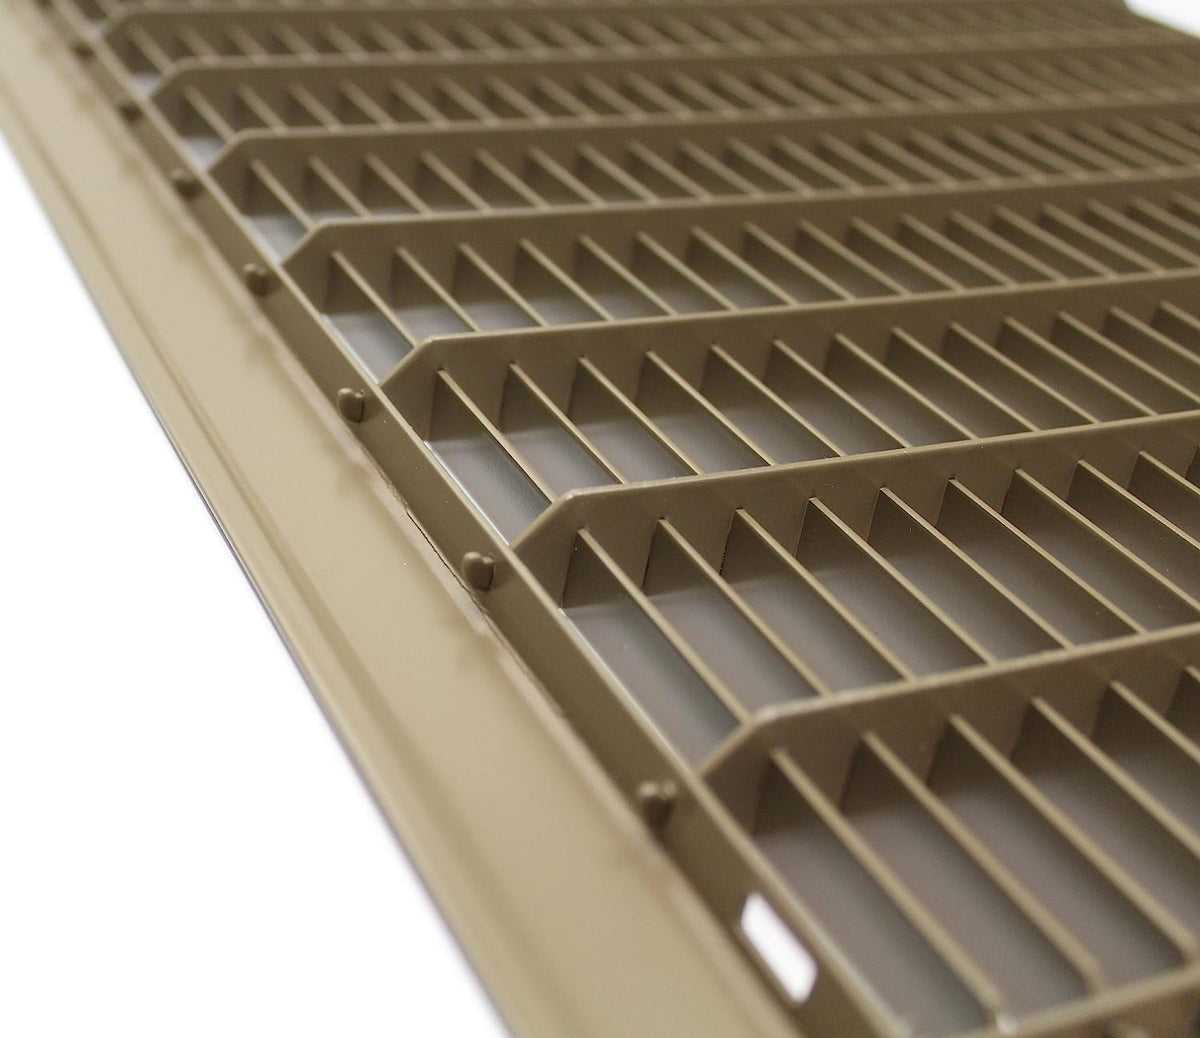 4&quot; X 16&quot; or 16&quot; x 4&quot; Heavy Duty Floor Grille - Fixed Blades Air Grille - Brown [Outer Dimensions: 5.75 X 17.75]